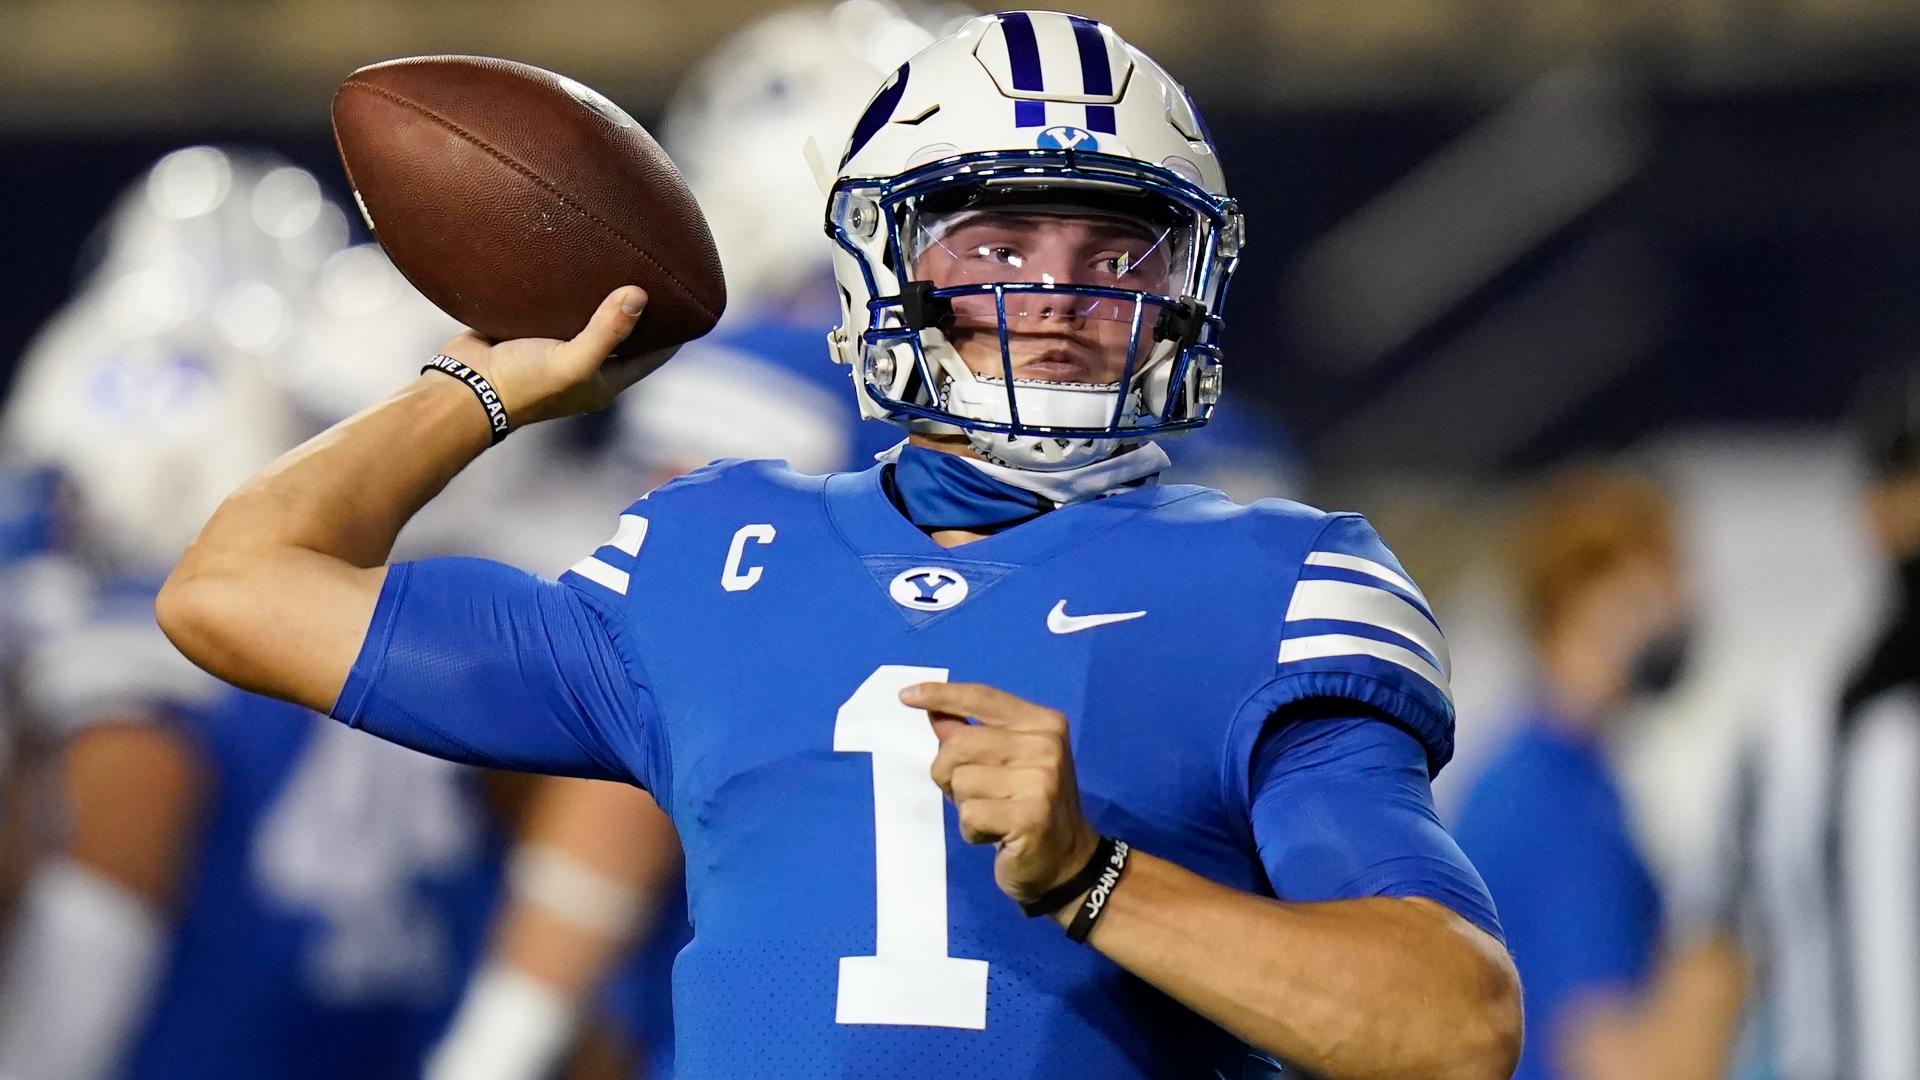 Trevor Matich raves about BYU QB Zach Wilson, who's quickly climbing up draft boards